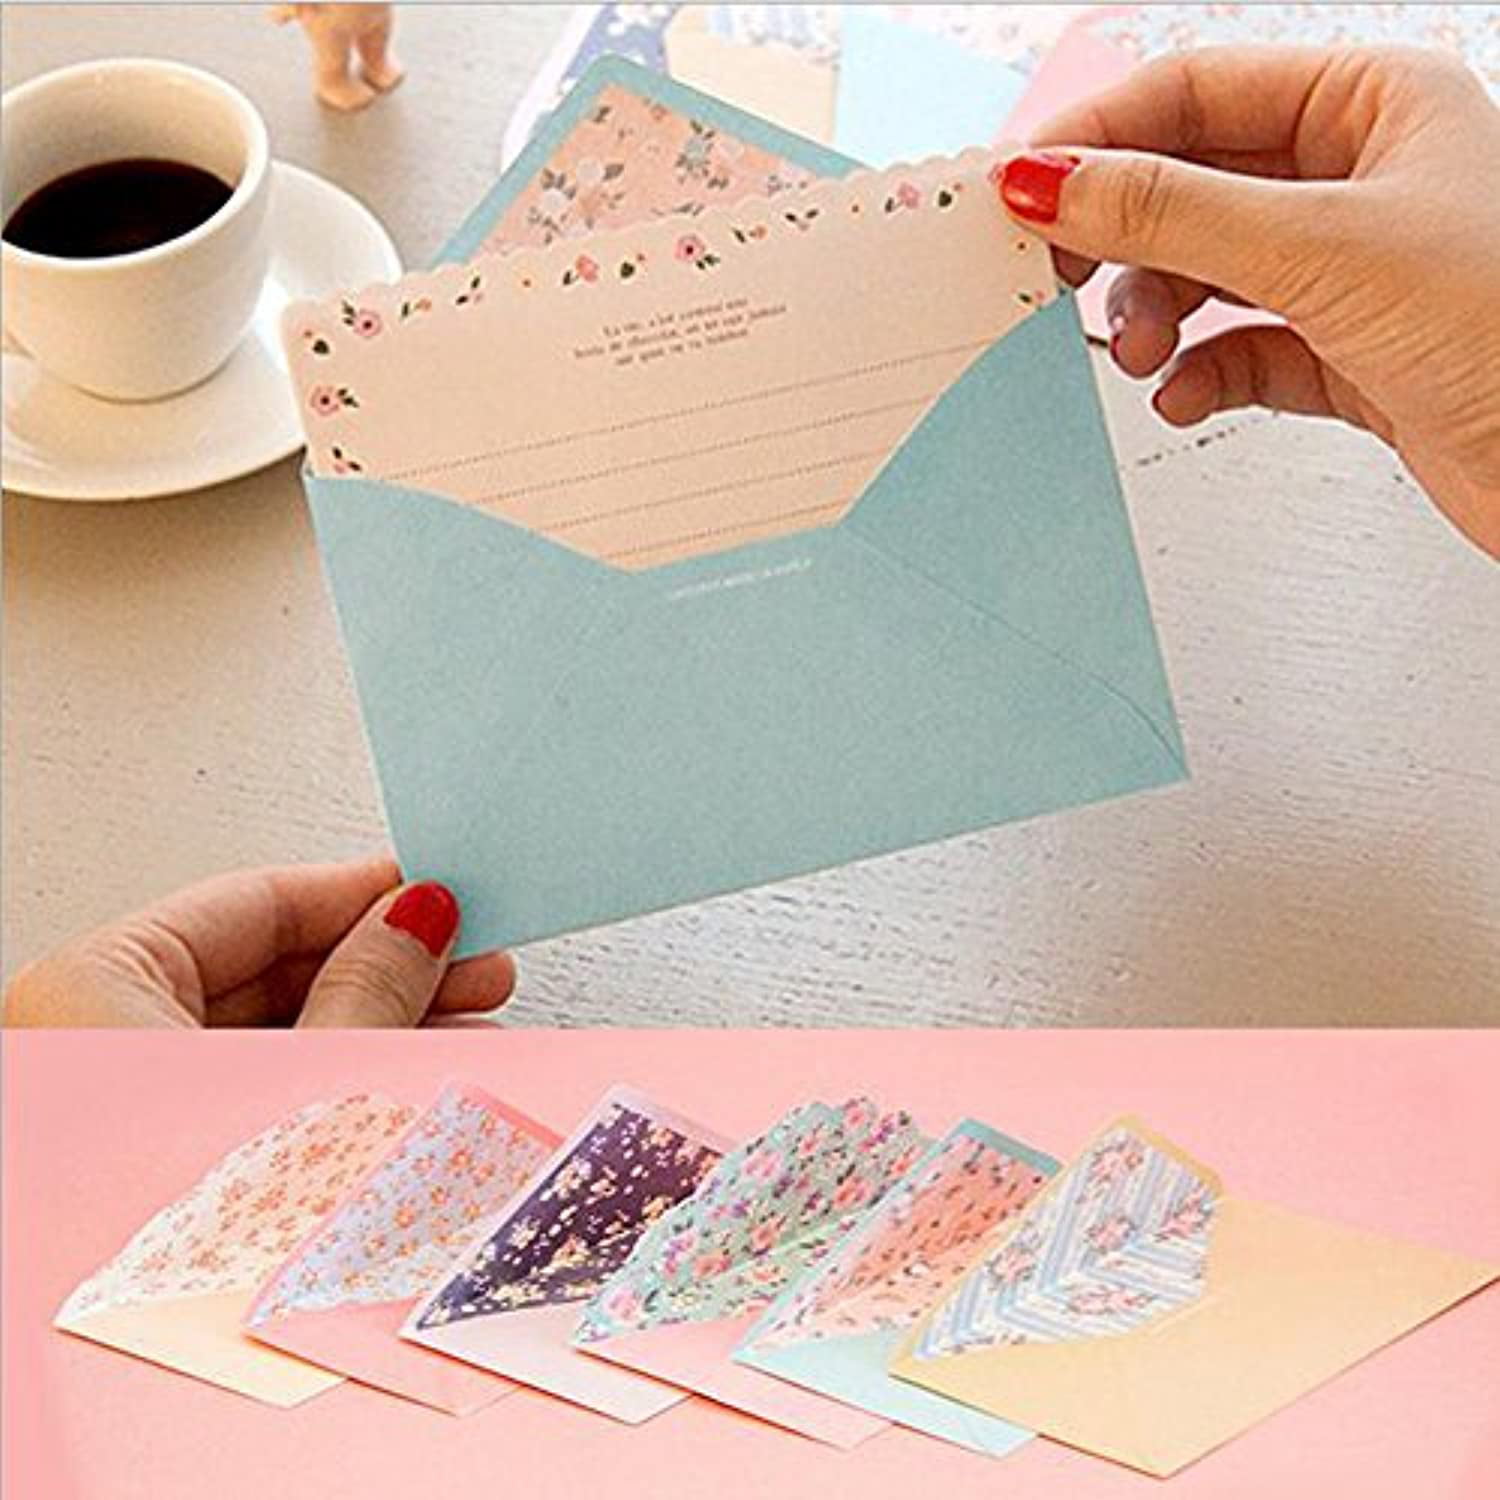 DxJ 32 Cute Lovely Kawaii Special Design Writing Stationery Paper with 16 Navy Style Envelopes,Stationary Paper and Envelopes Set